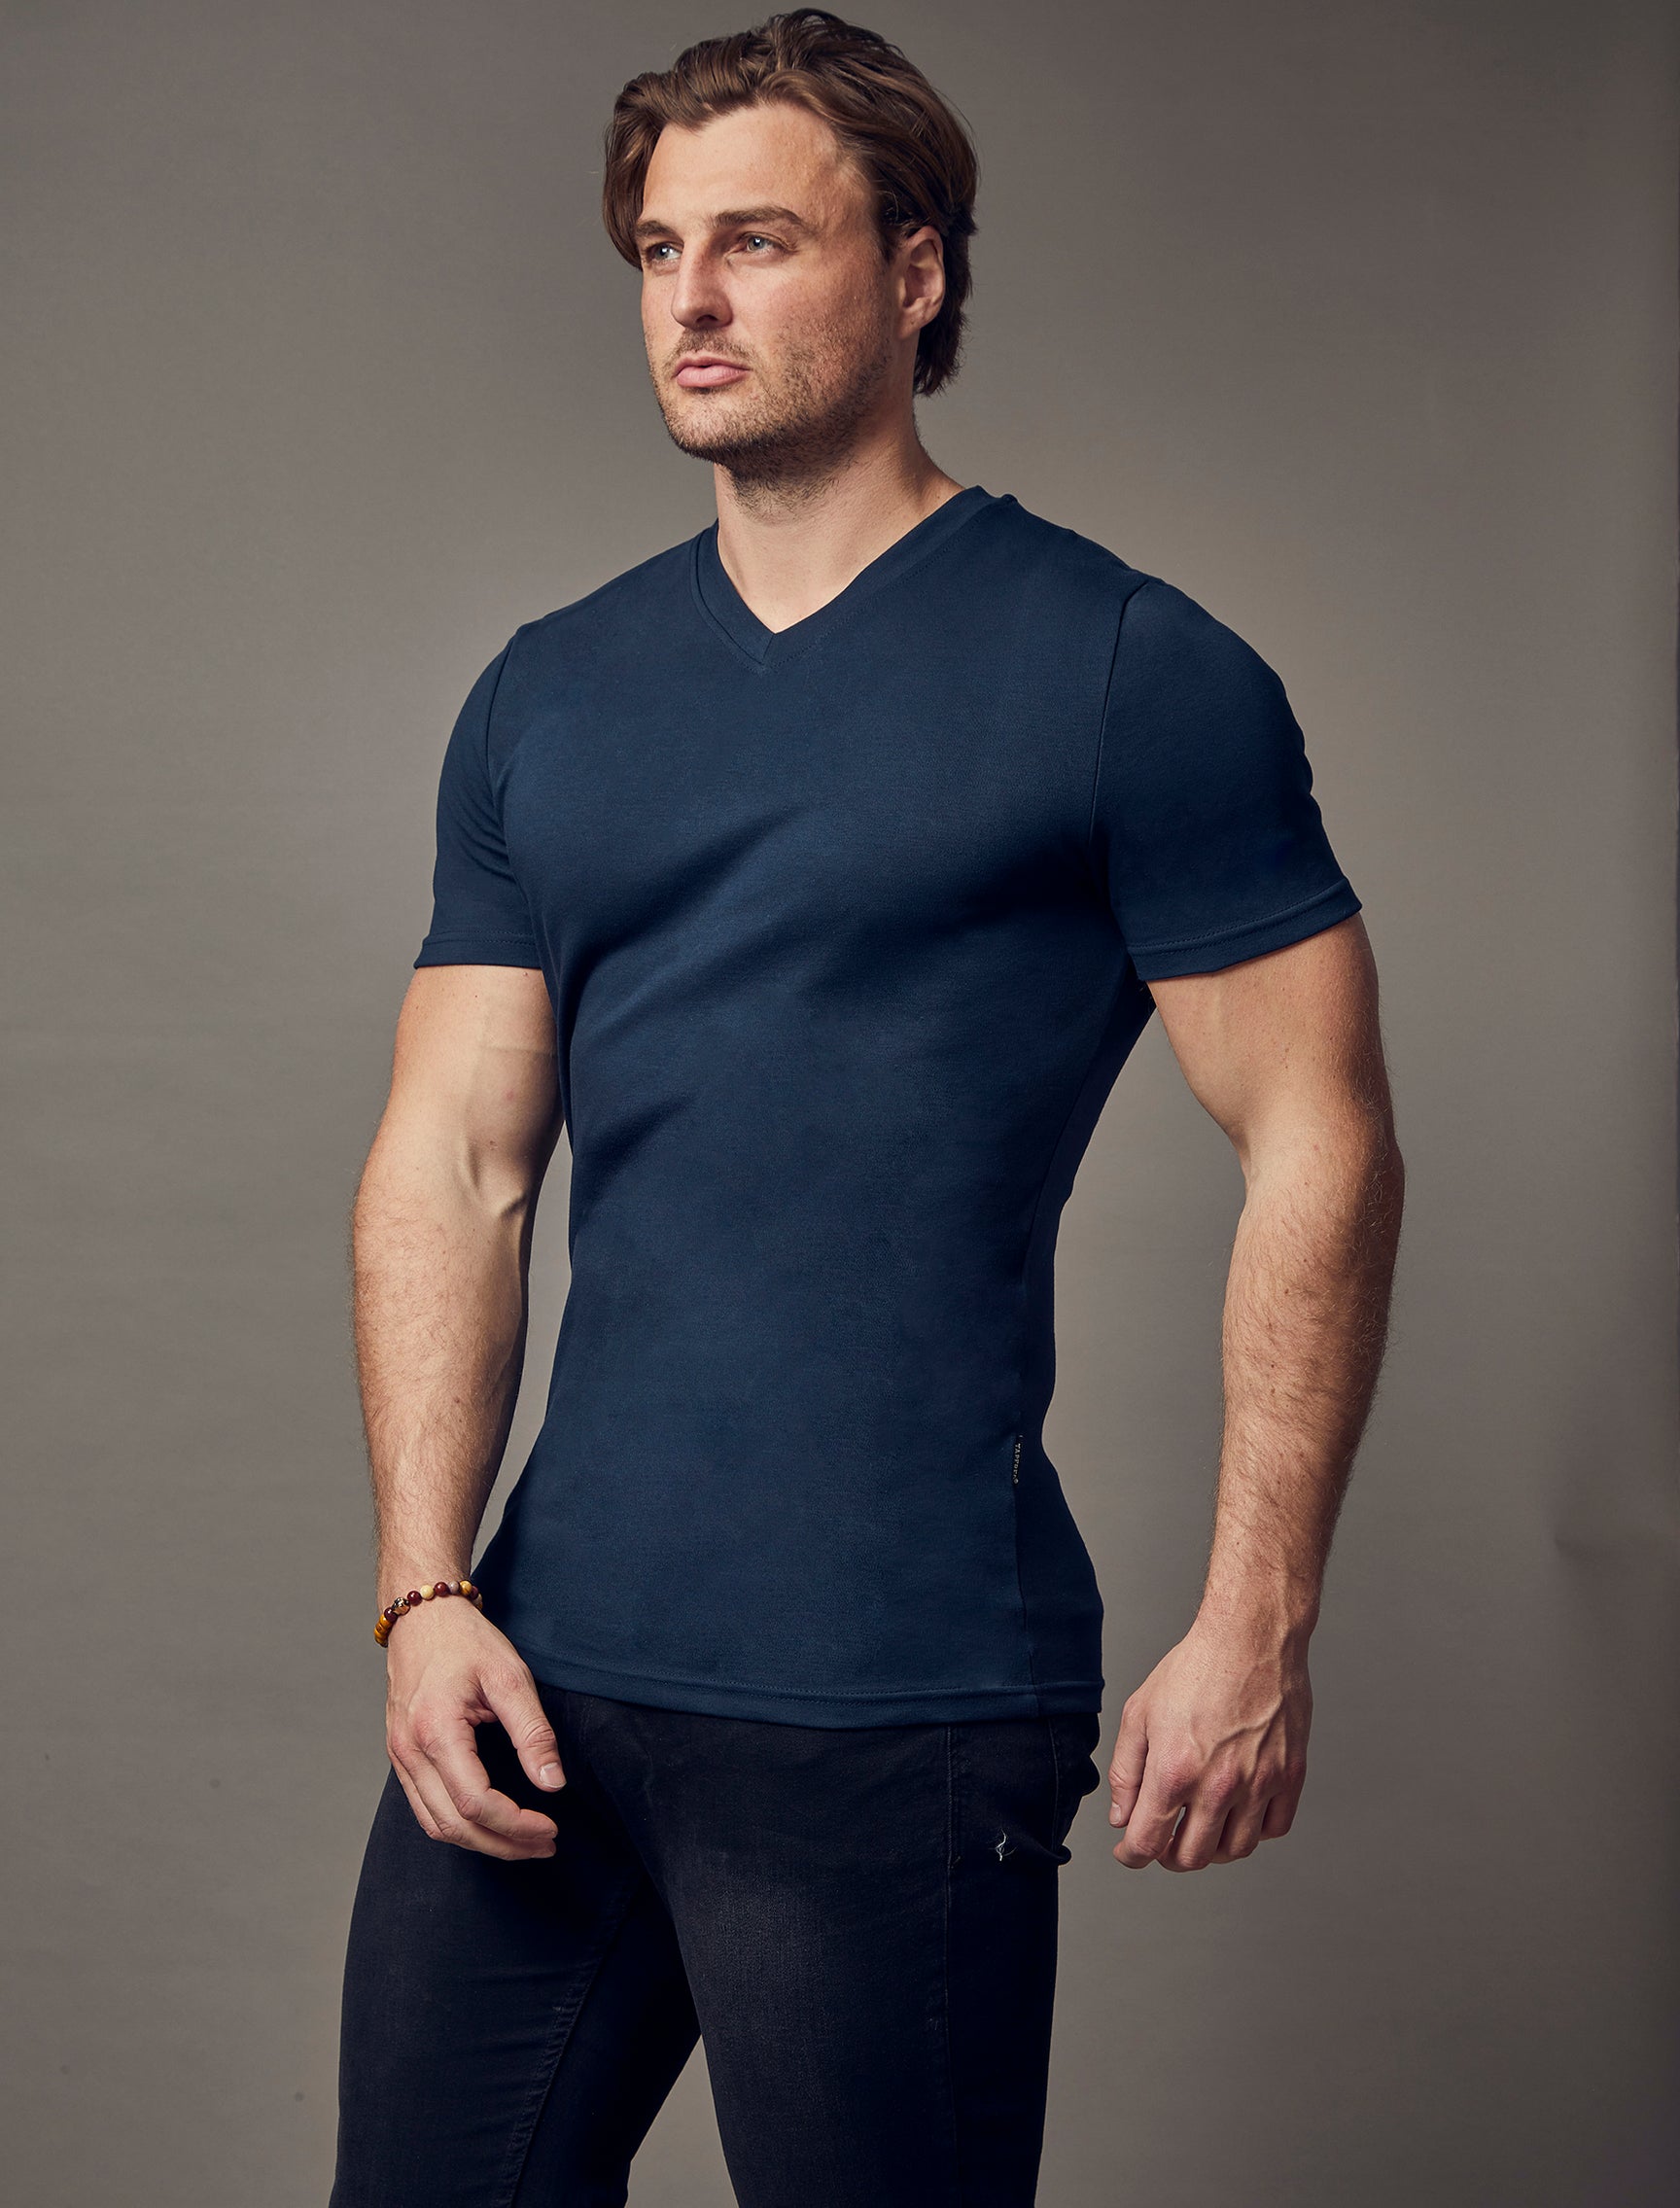 Buy Mens V Neck Muscle Tees | V-Neck Tapered Fit T-Shirts – Tapered ...